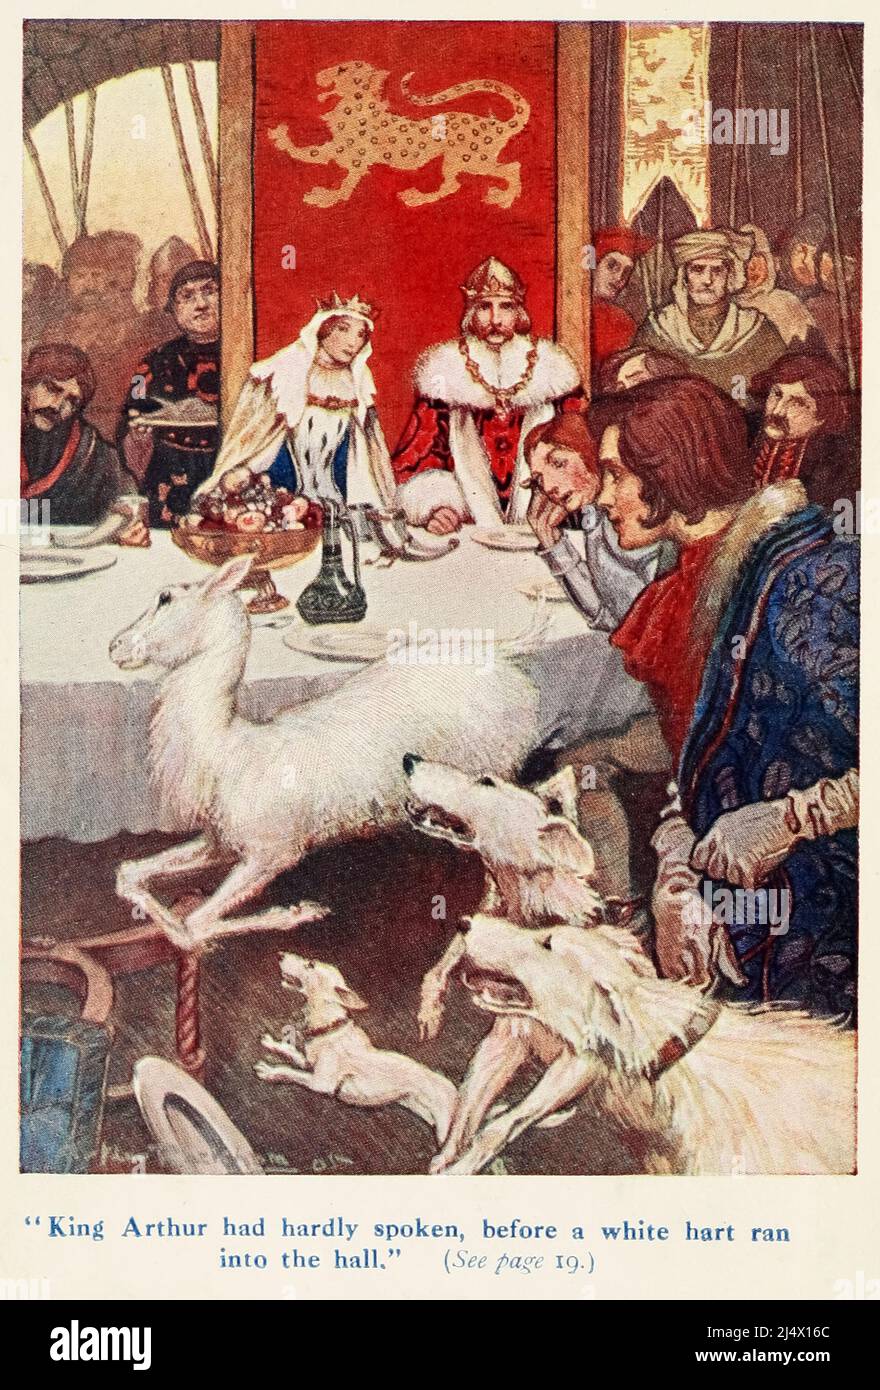 KING ARTHUR HAD HARDLY SPOKEN, BEFORE A WHITE HART RAN INTO THE HALL  from the book ' Stories of King Arthur ' by Arthur Lincoln Haydon, Illustrated by Arthur Rackham, Stock Photo